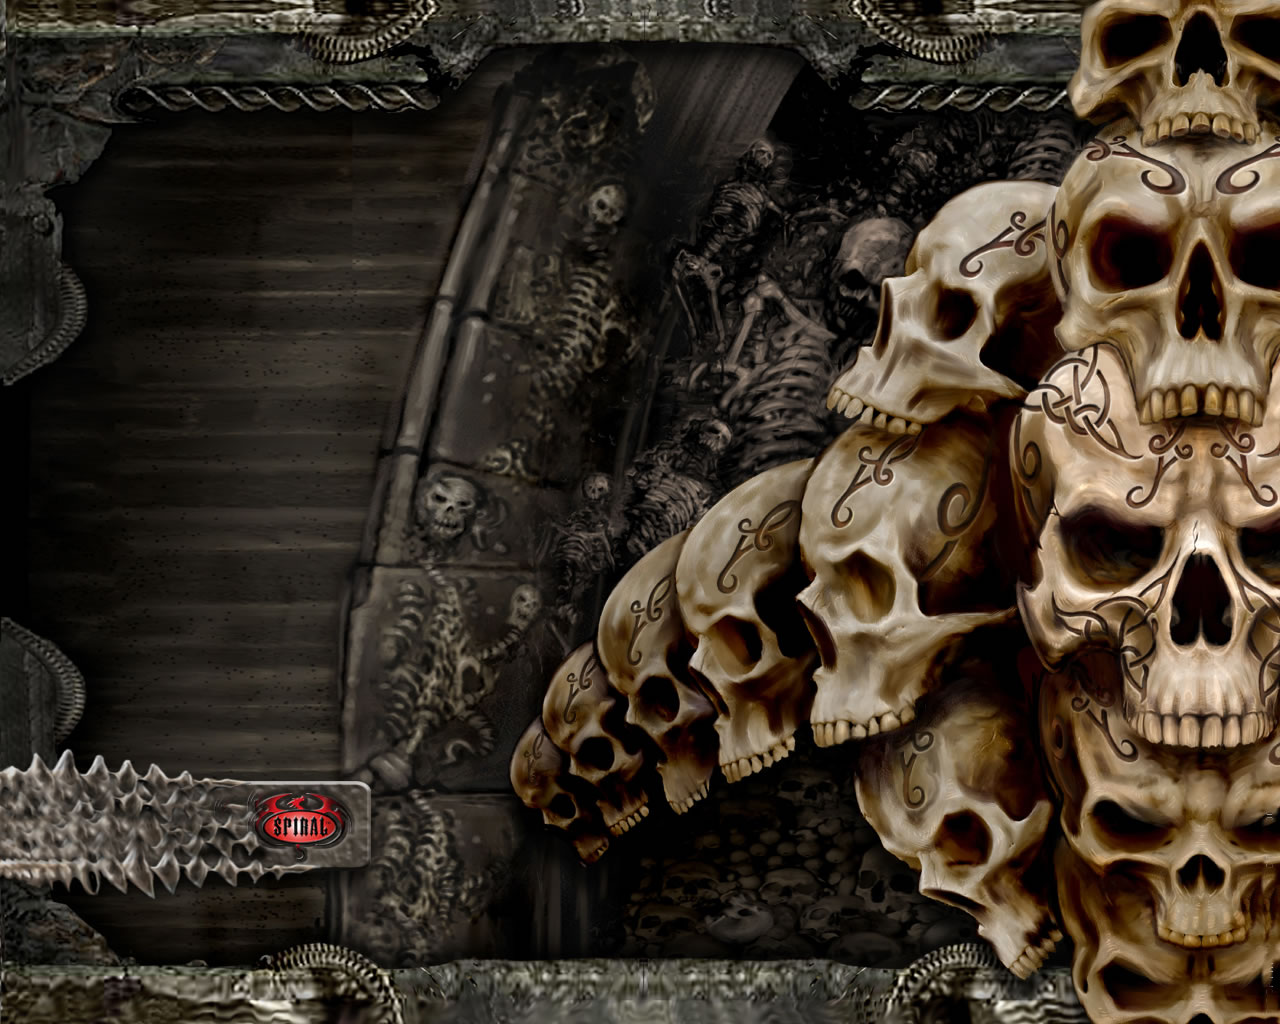  Scary Skulls Art 3D Backgrounds on this Scary Wallpaper Backgrounds